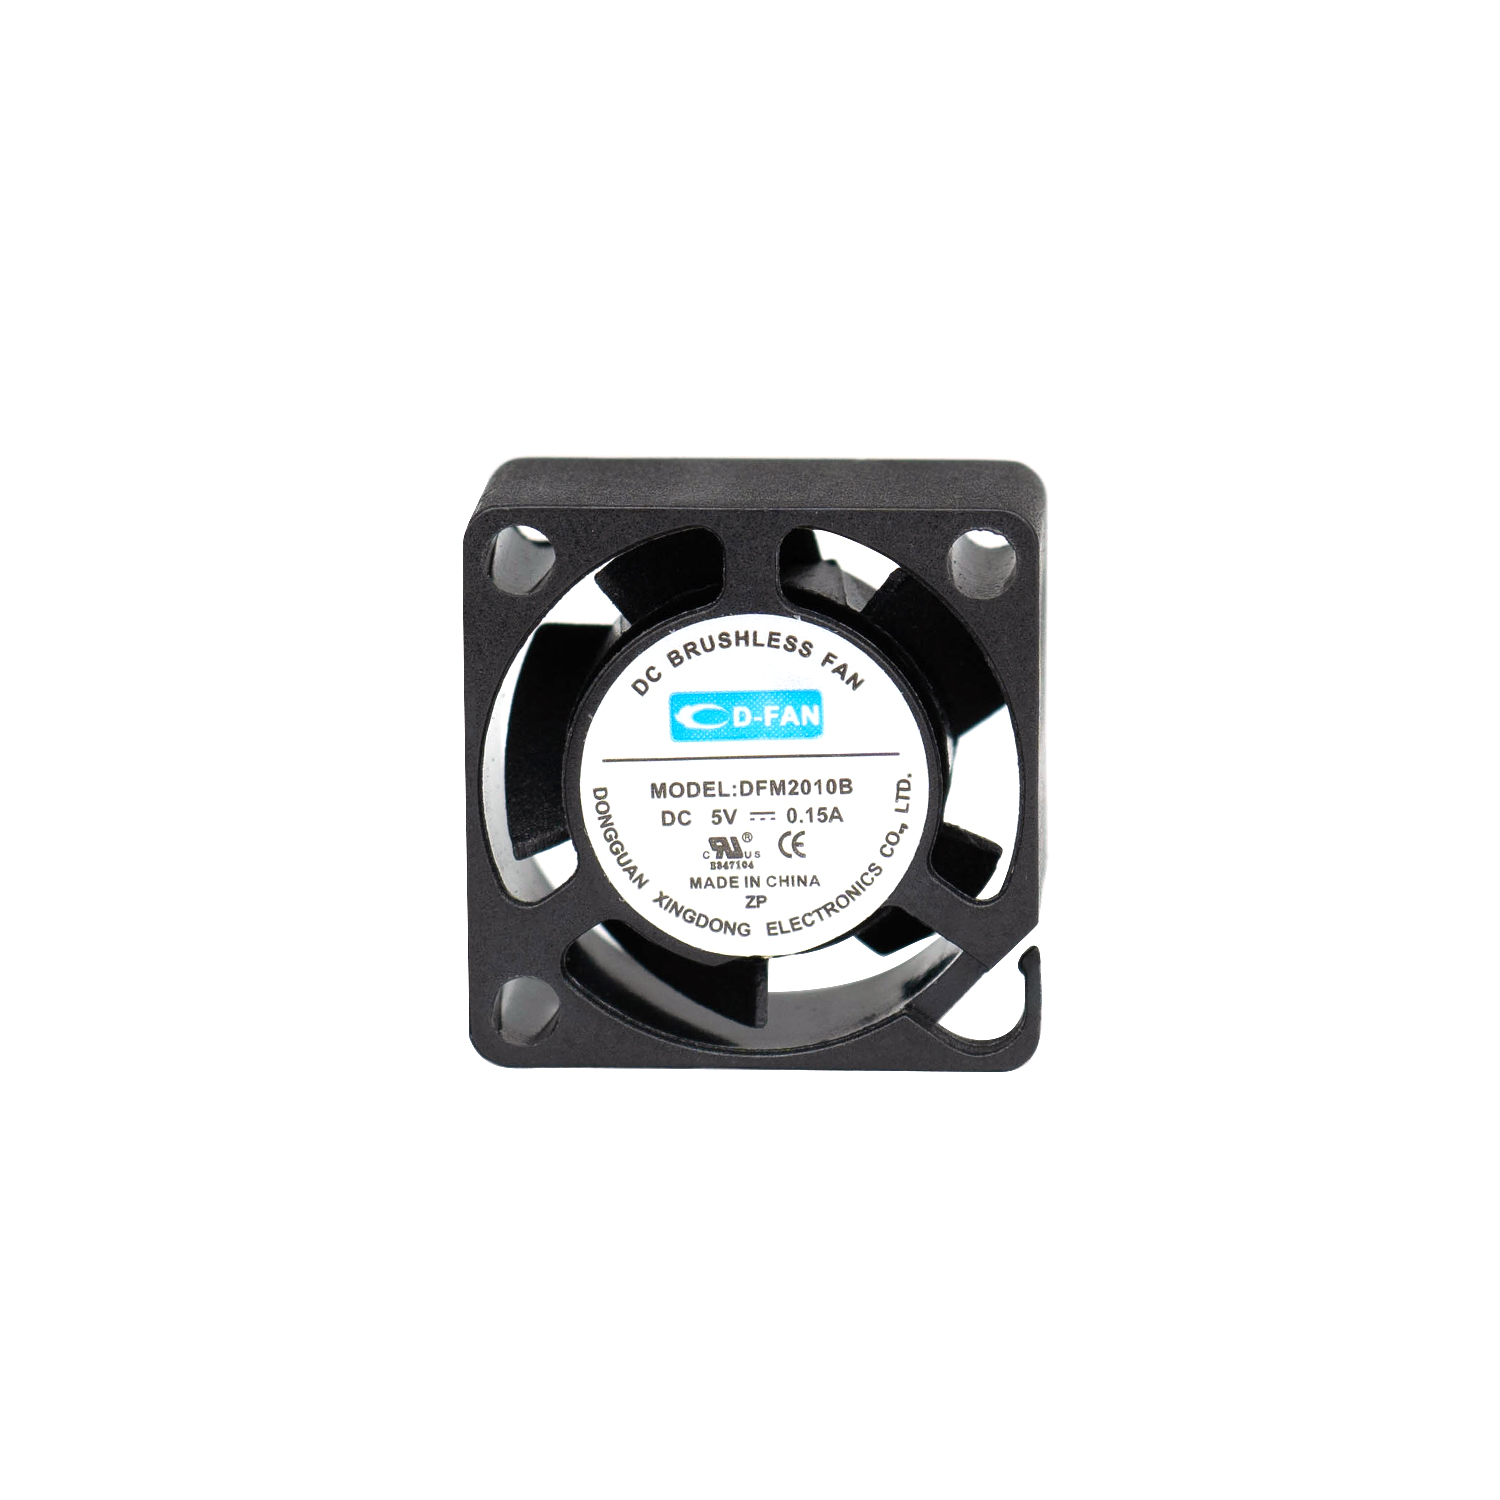 exhaust 3.3v DC Axial Fan for server